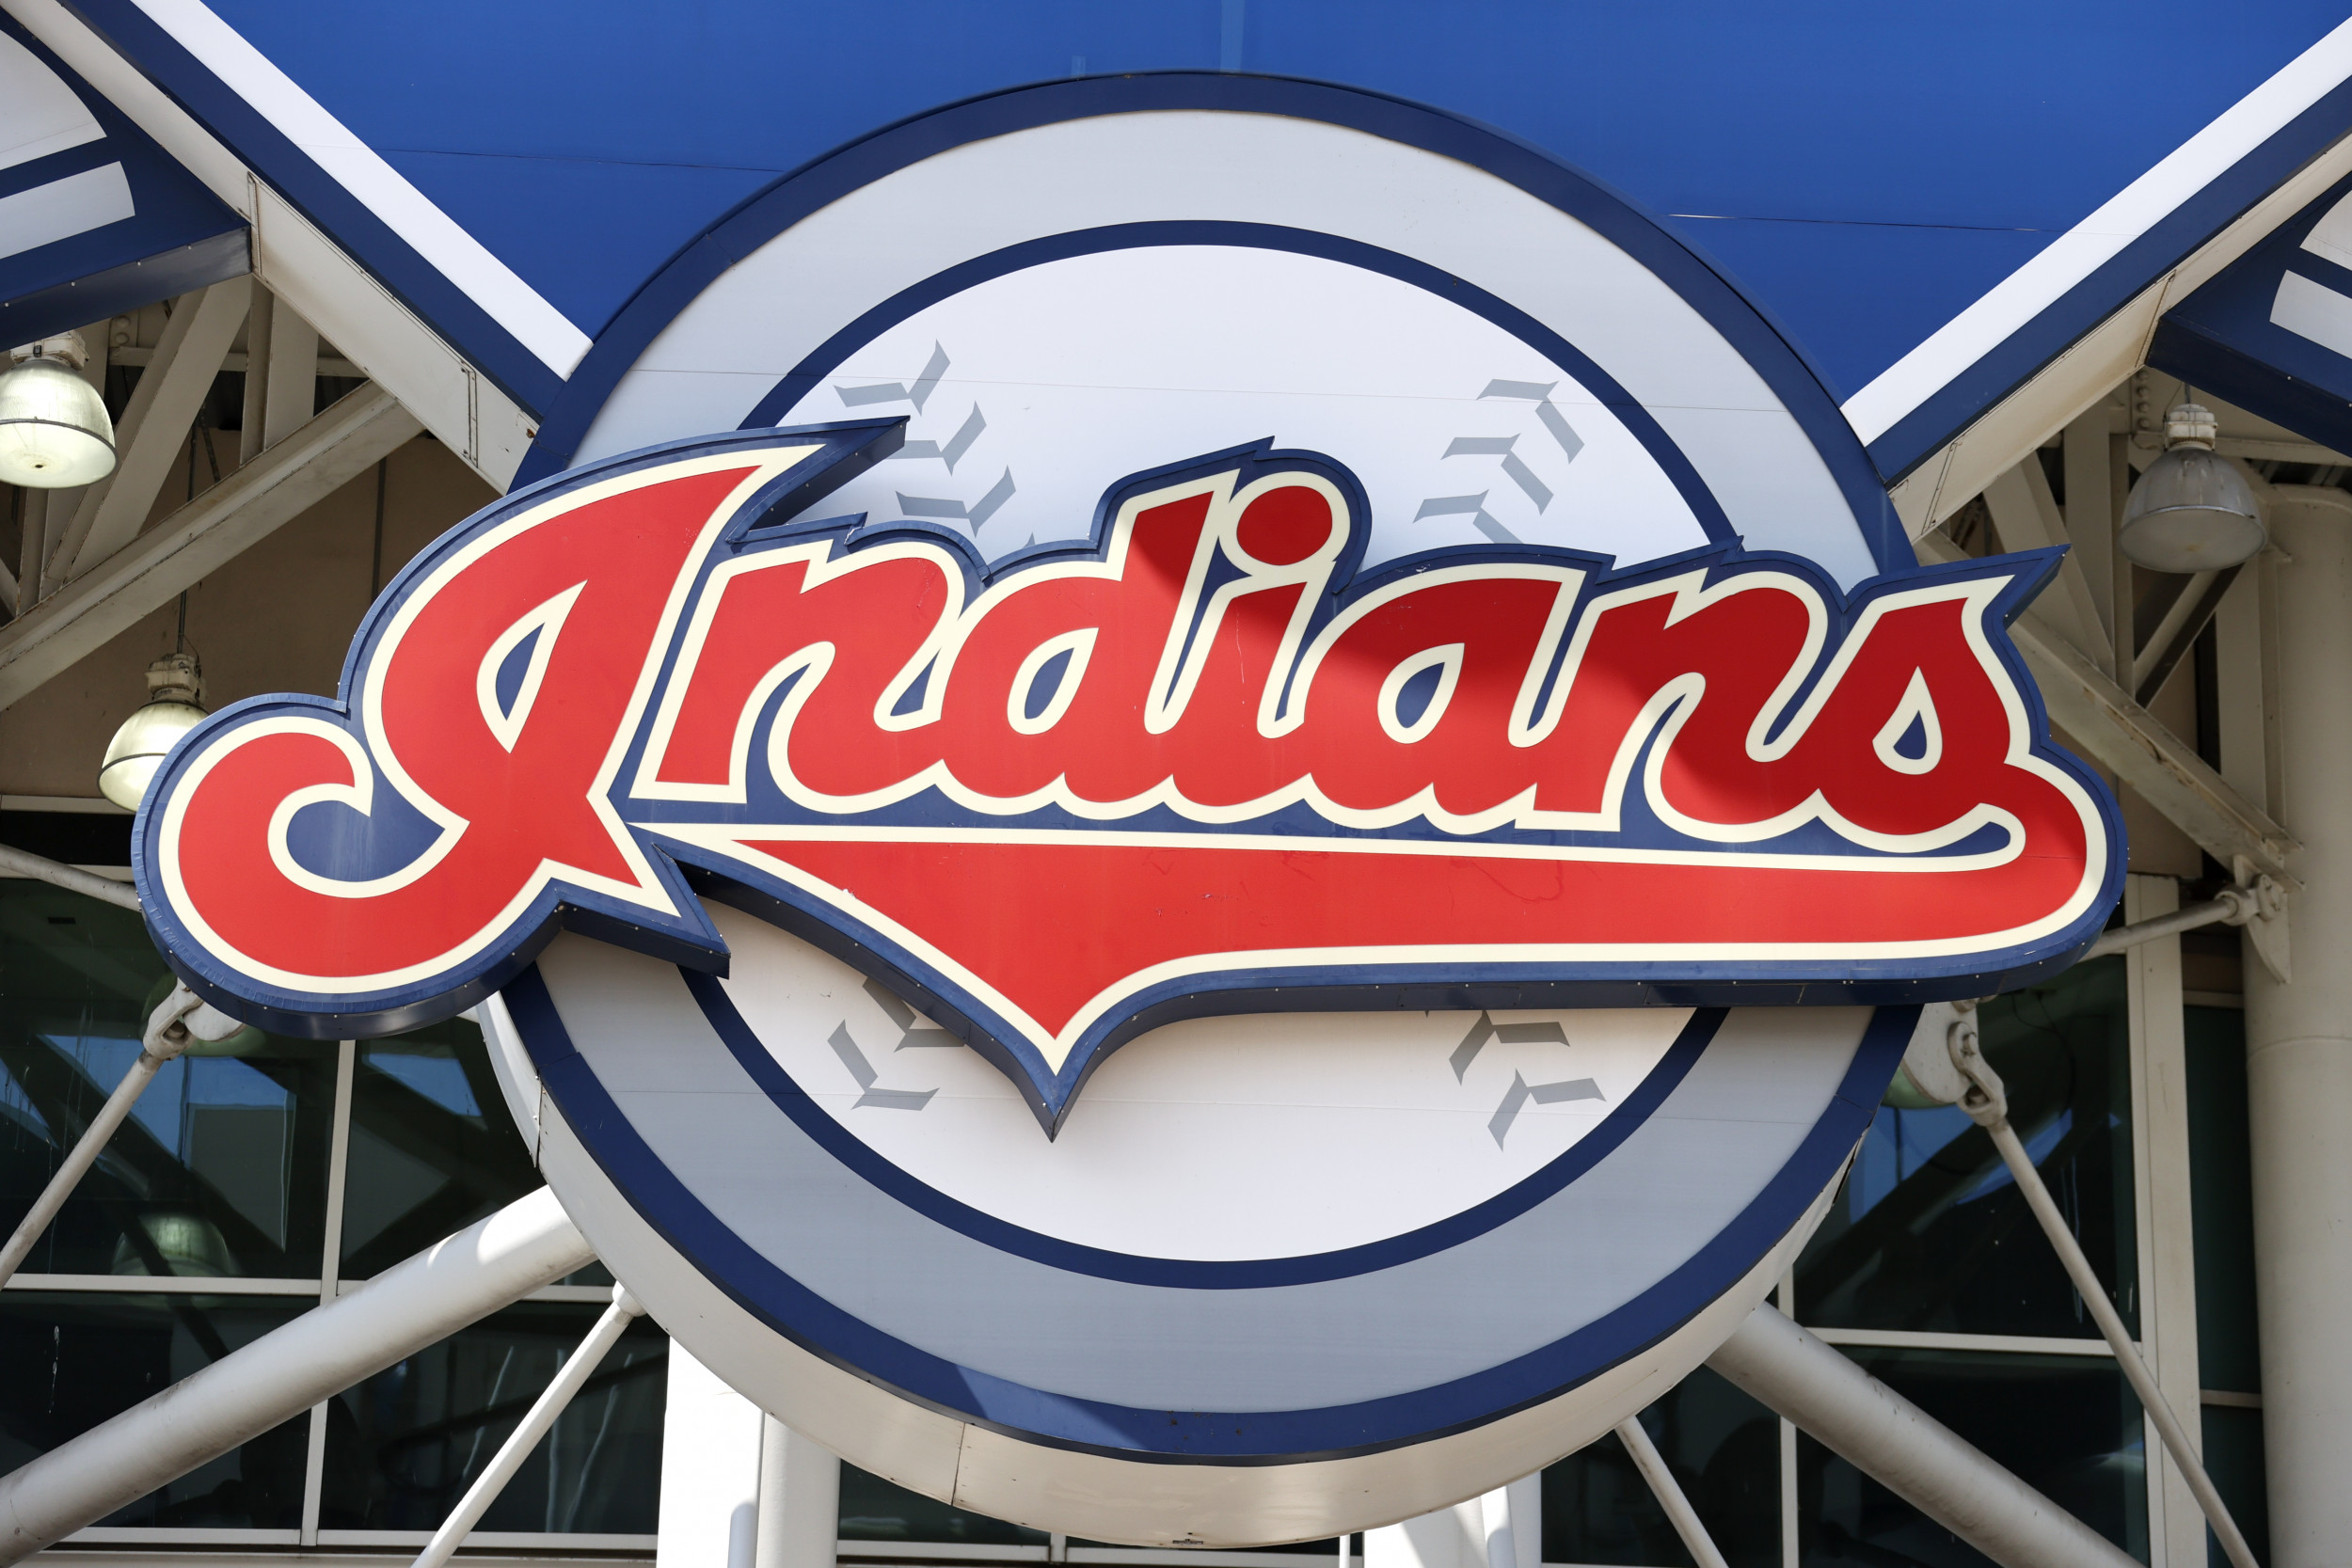 Why Guardians? The history behind Cleveland baseball's new name